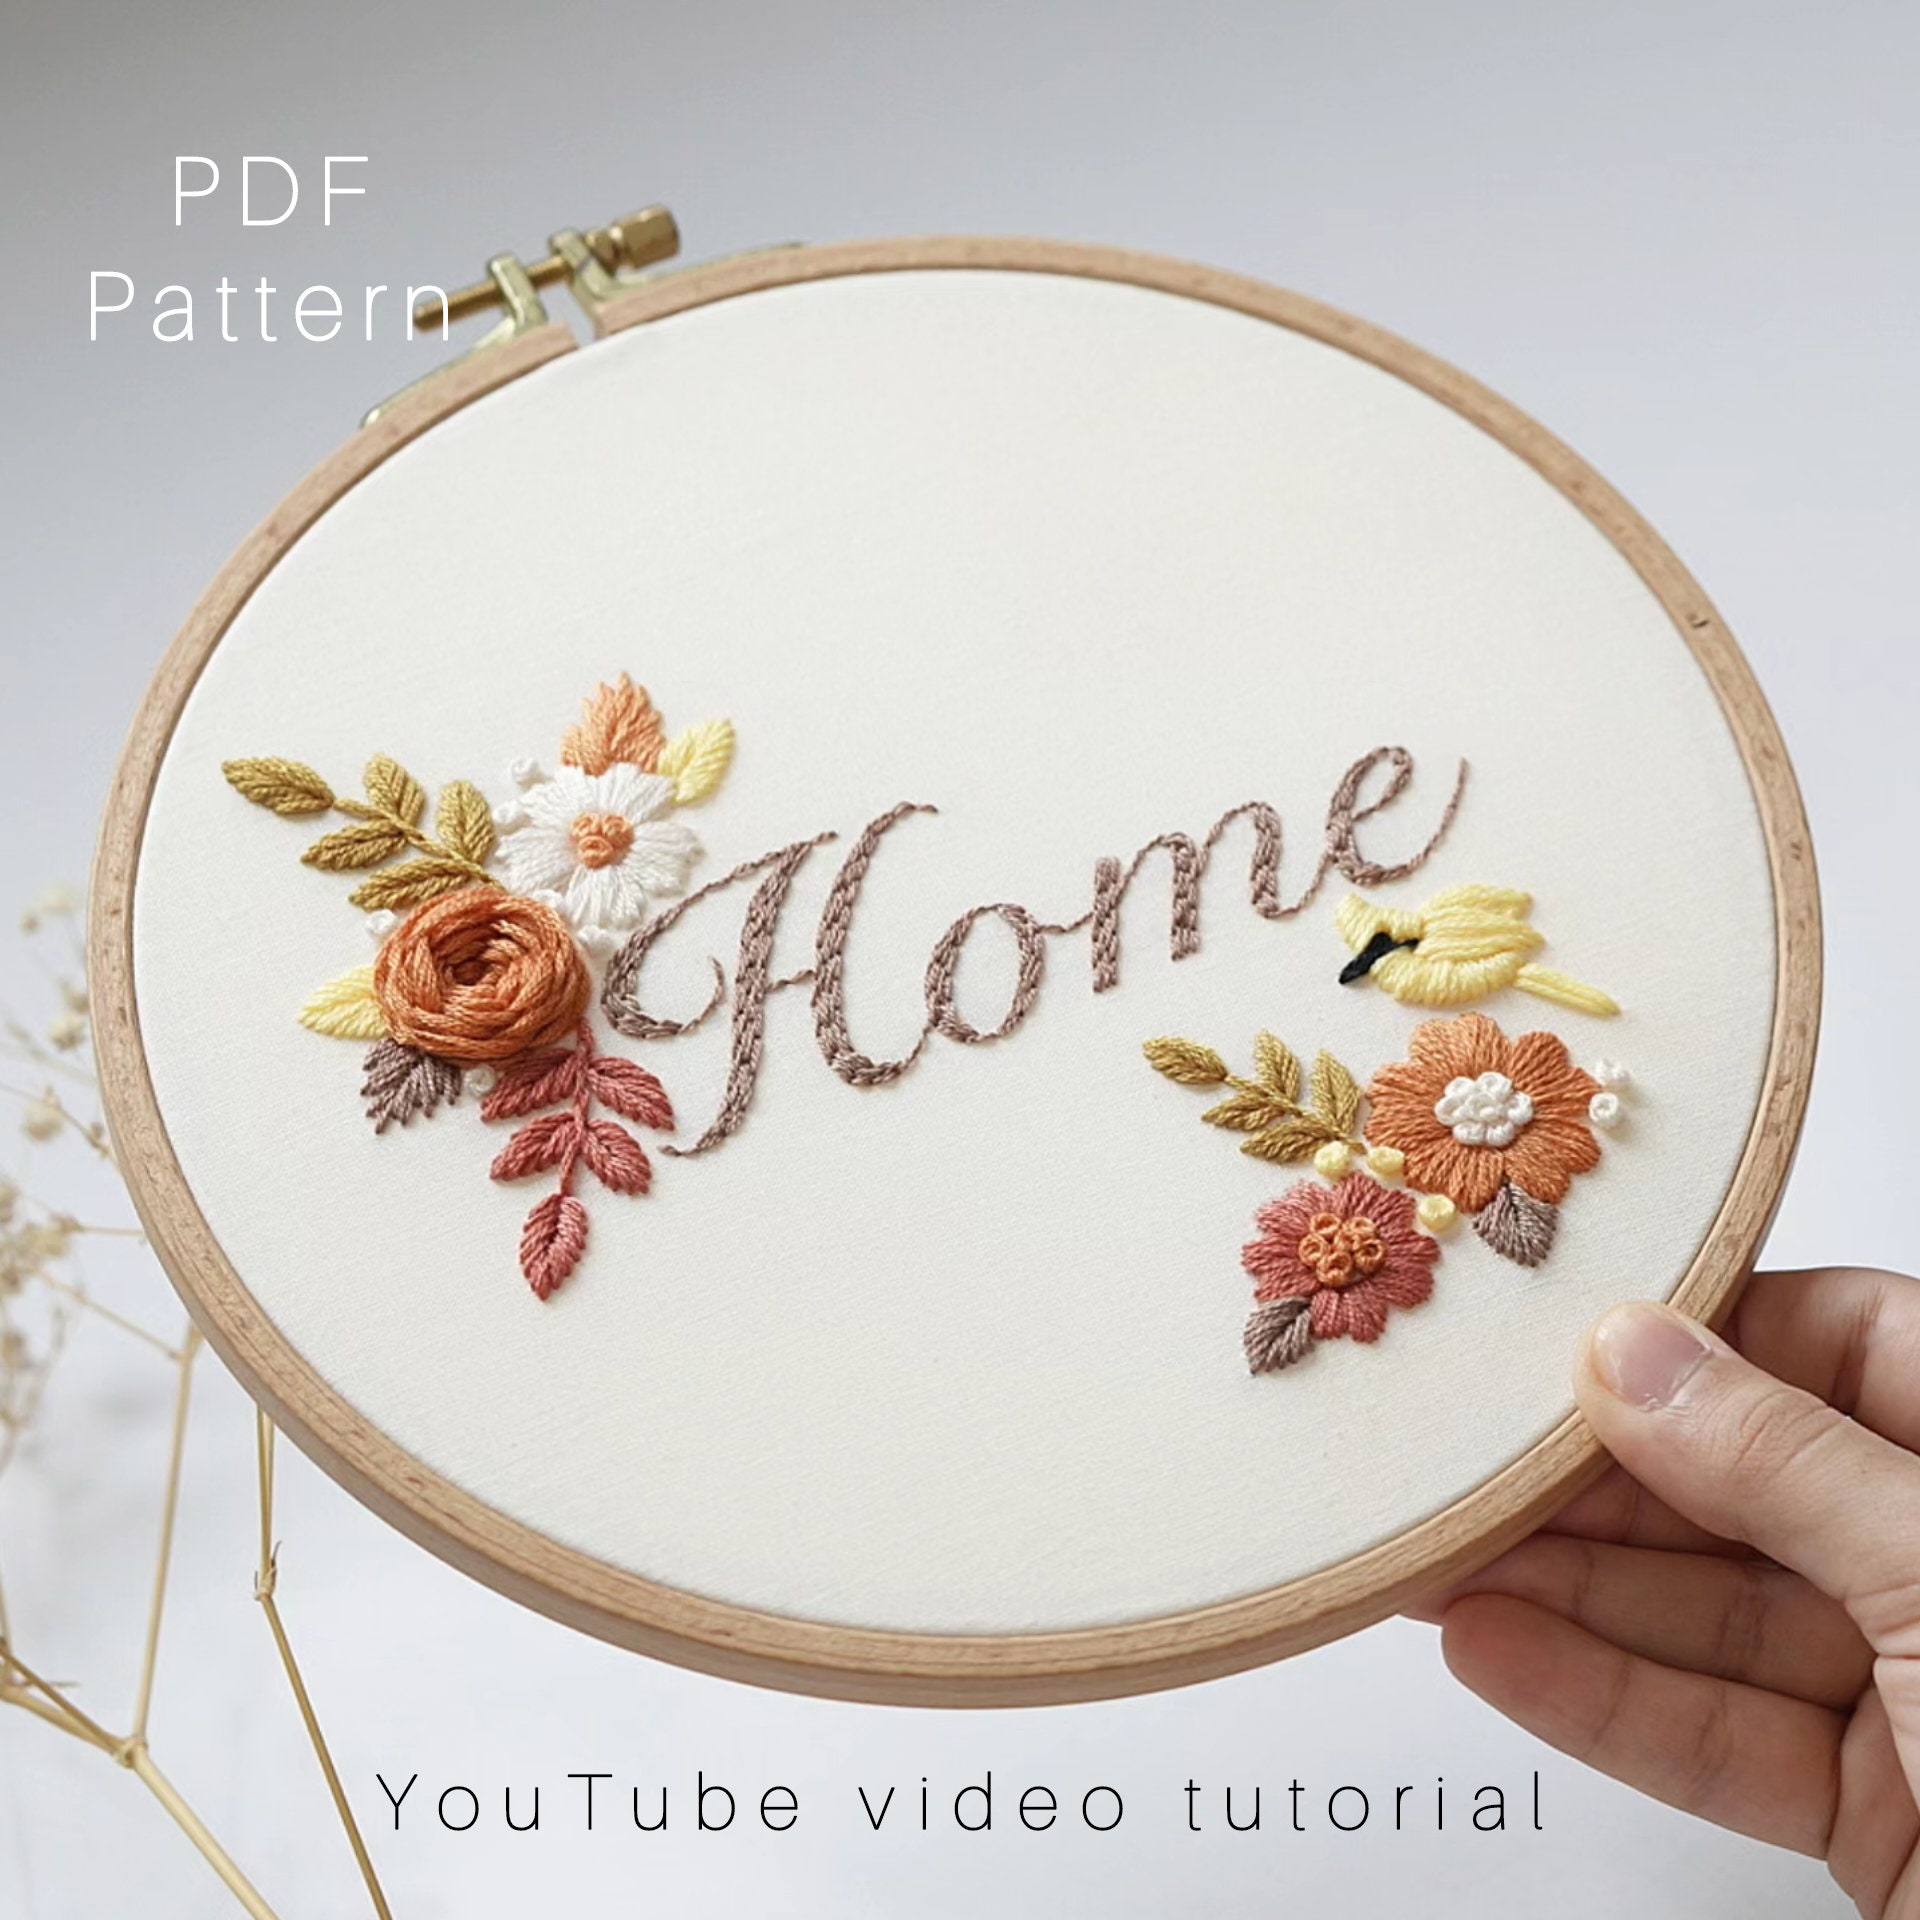 PDF Pattern Video Tutorial/home-hand Embroidery photo